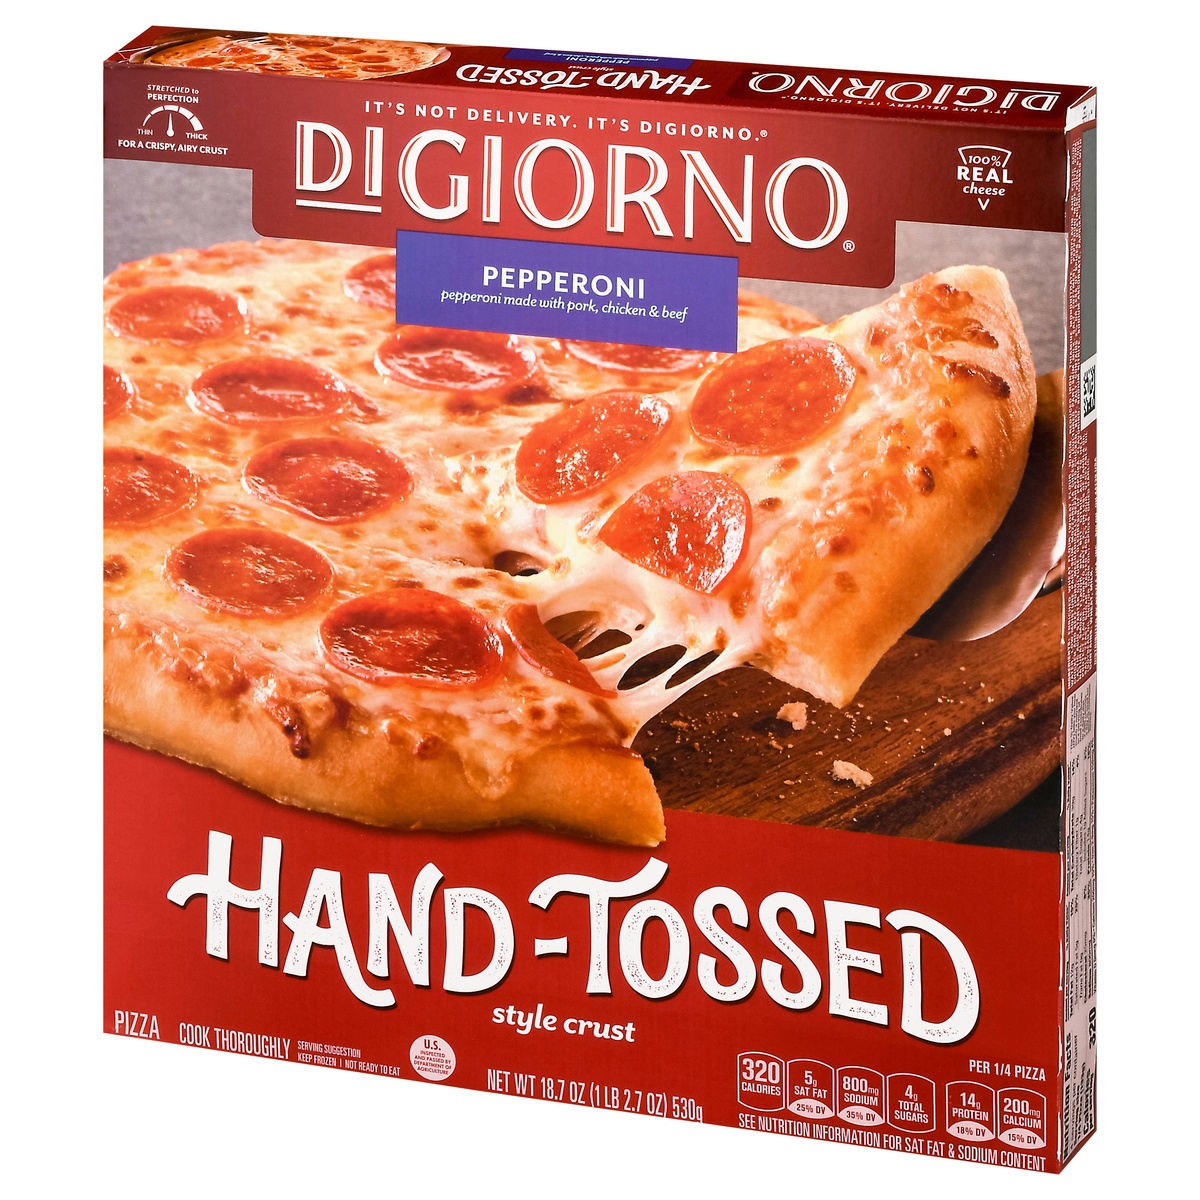 slide 4 of 10, DIGIORNO Pepperoni Frozen Pizza with Hand-Tossed Style Crust, 18.7 oz